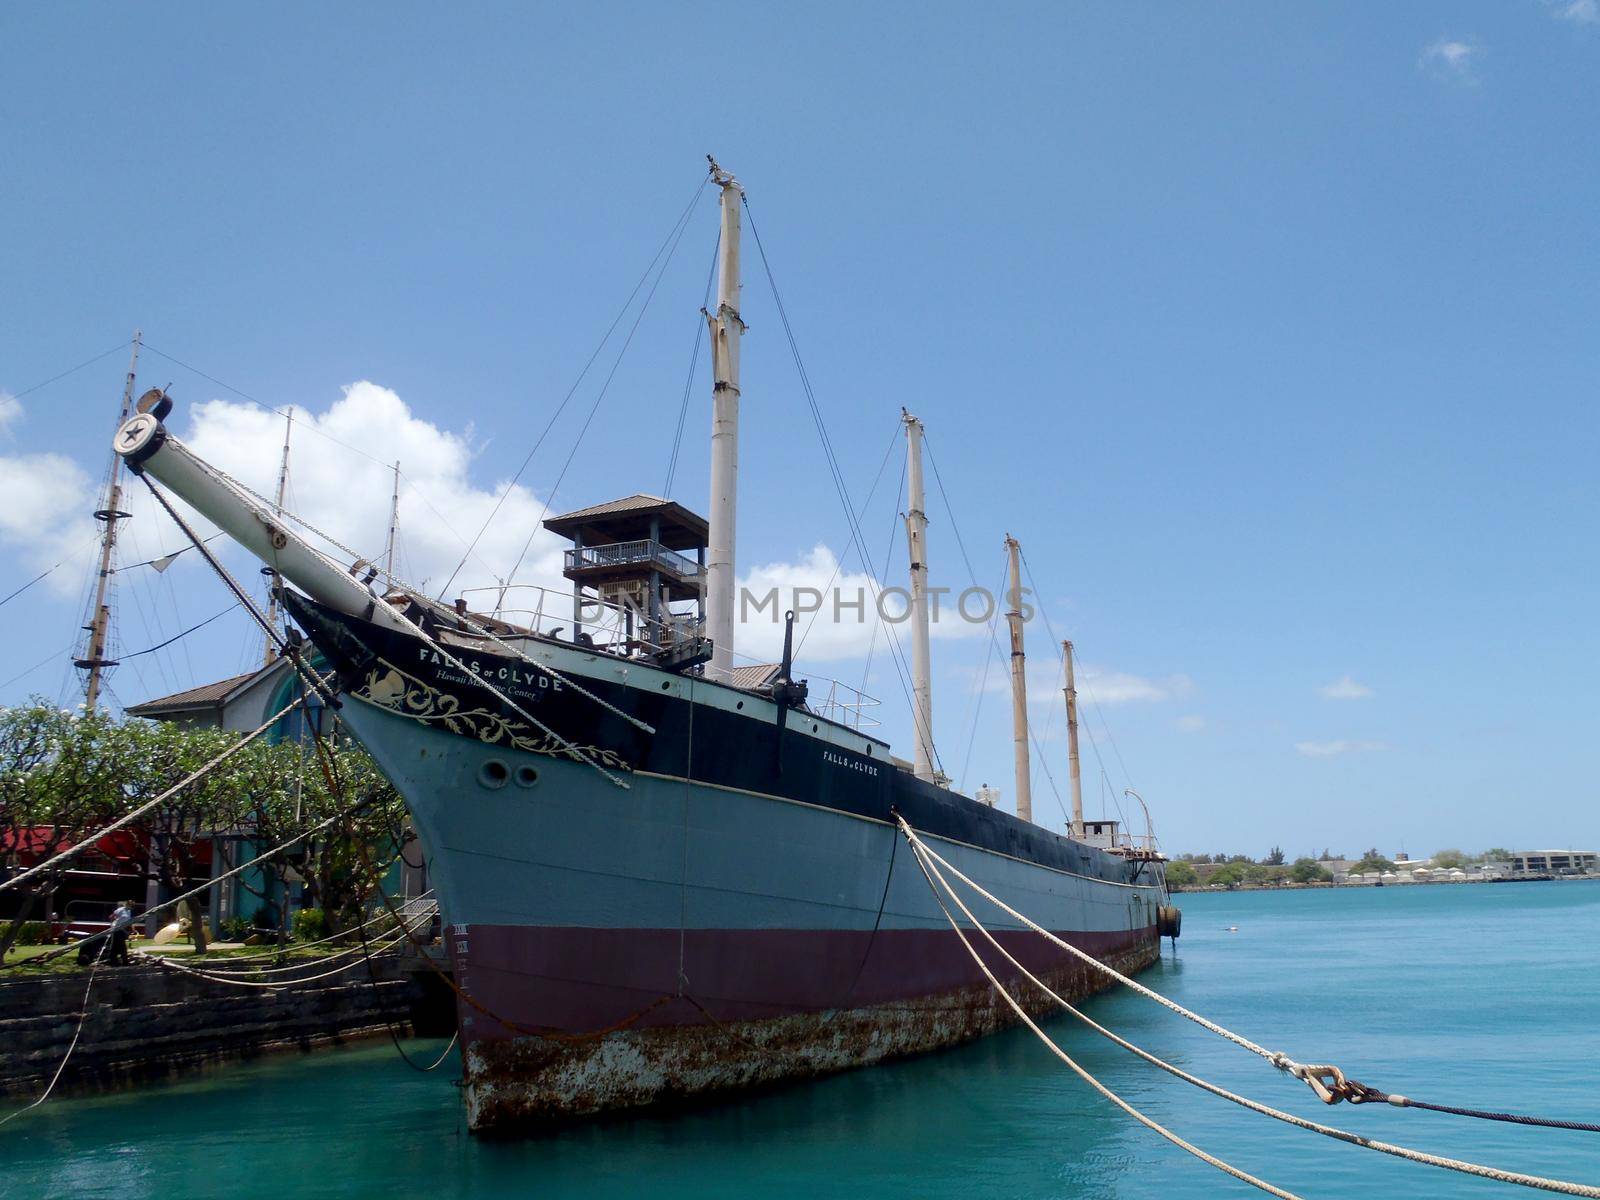 Historic Falls of Clyde Ship sits in Honolulu Harbor. Falls of Clyde is the last surviving iron-hulled, four-masted full rigged ship, and the only remaining sail-driven oil tanker. Designated a U.S. National Historic Landmark in 1989